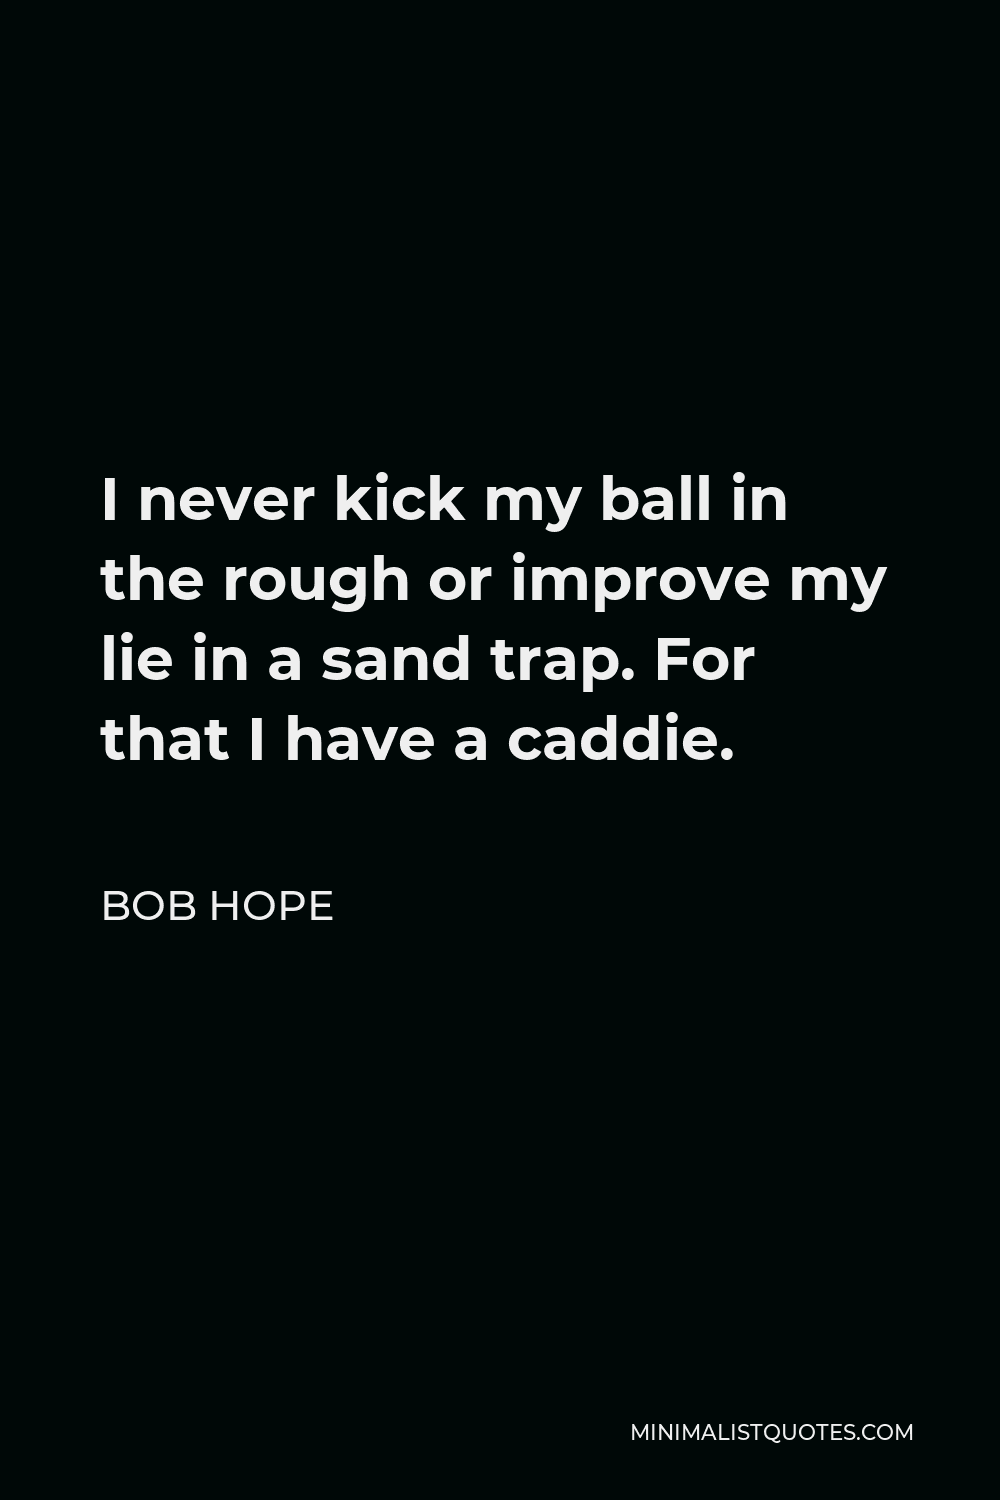 Bob Hope Quote - I never kick my ball in the rough or improve my lie in a sand trap. For that I have a caddie.